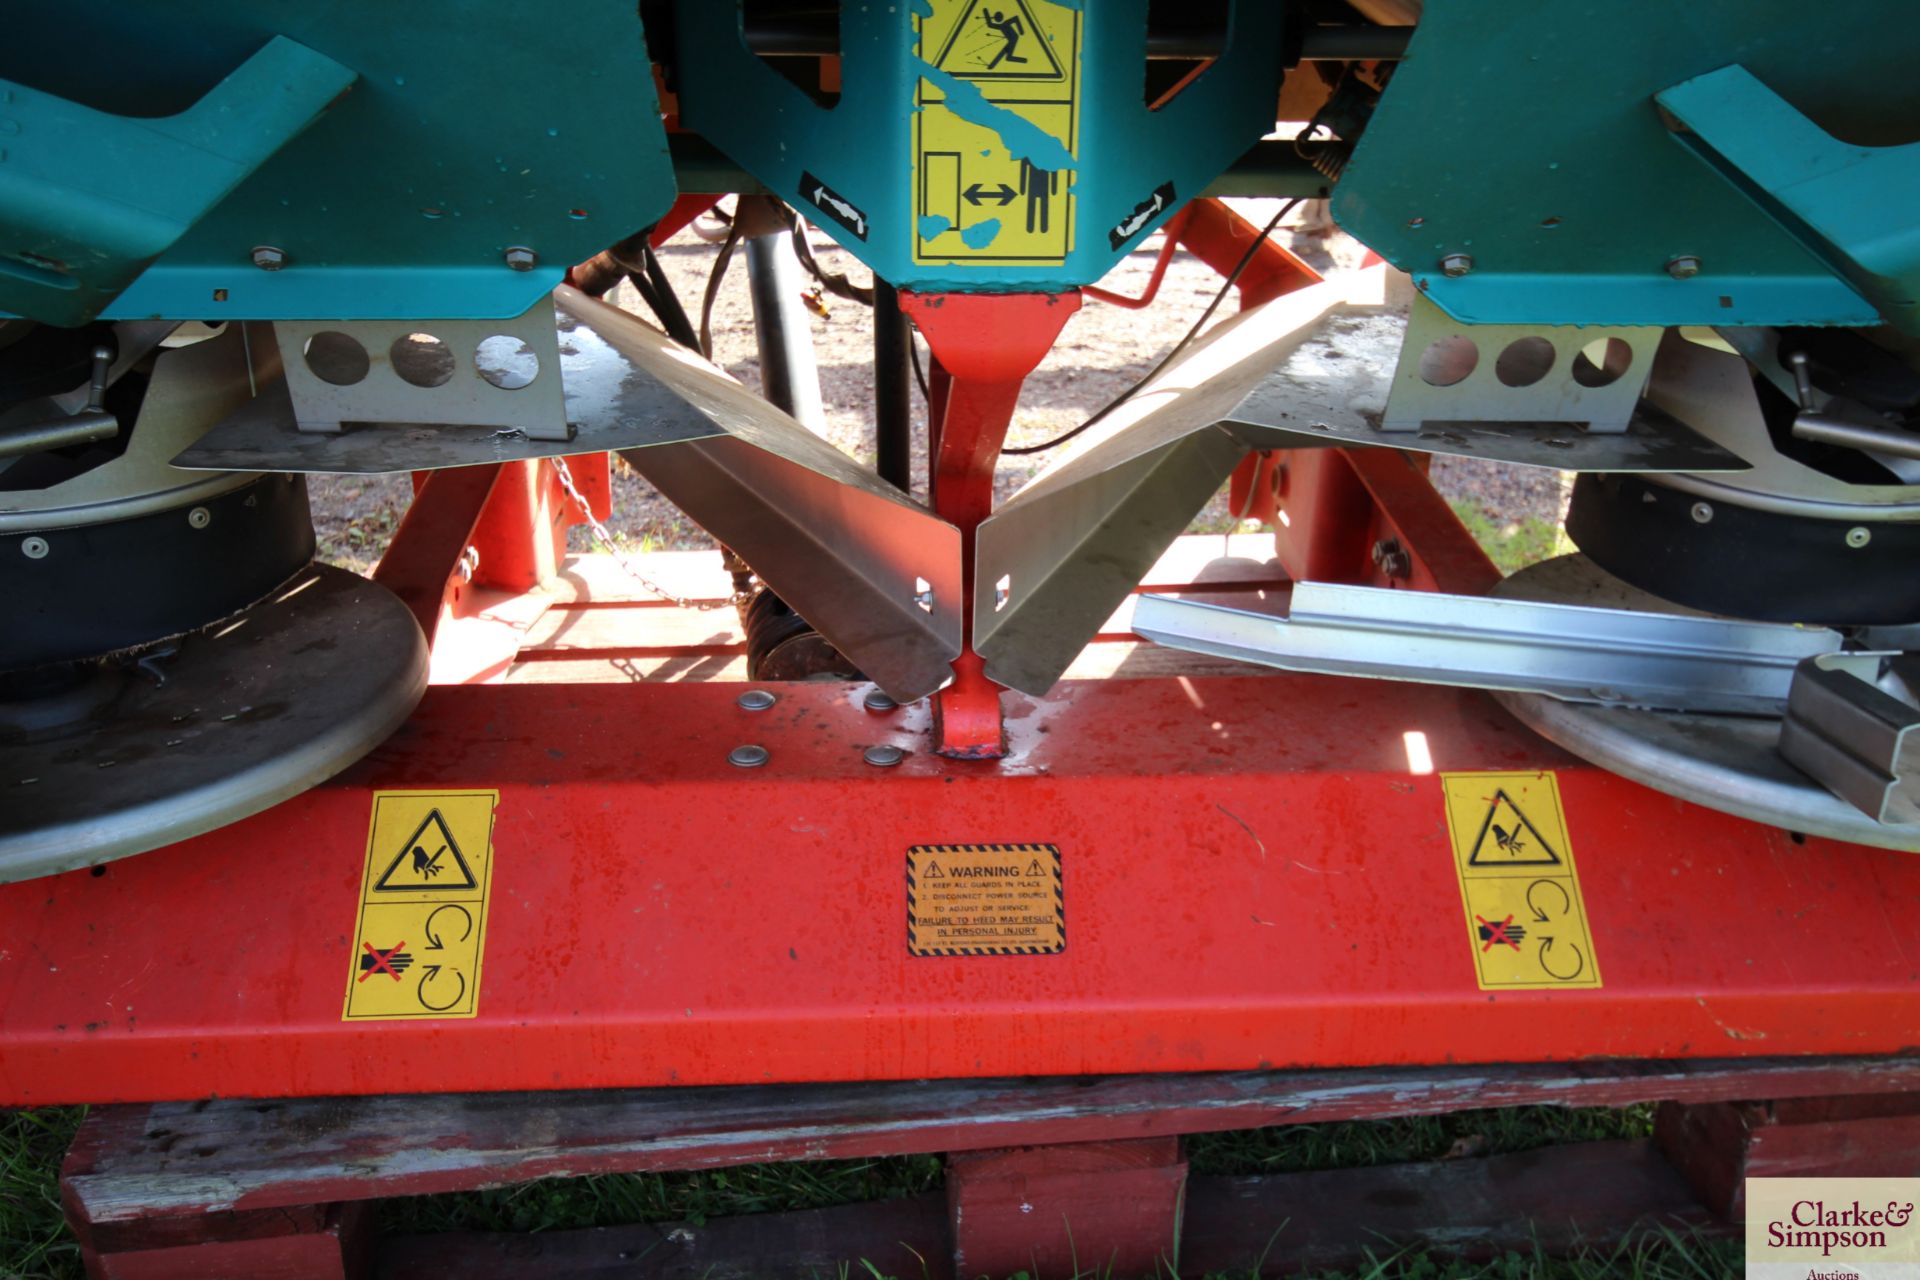 Reco Sulky X36 24m twin disc fertiliser spreader. 2008. Serial number BD0129. With hopper - Image 12 of 14